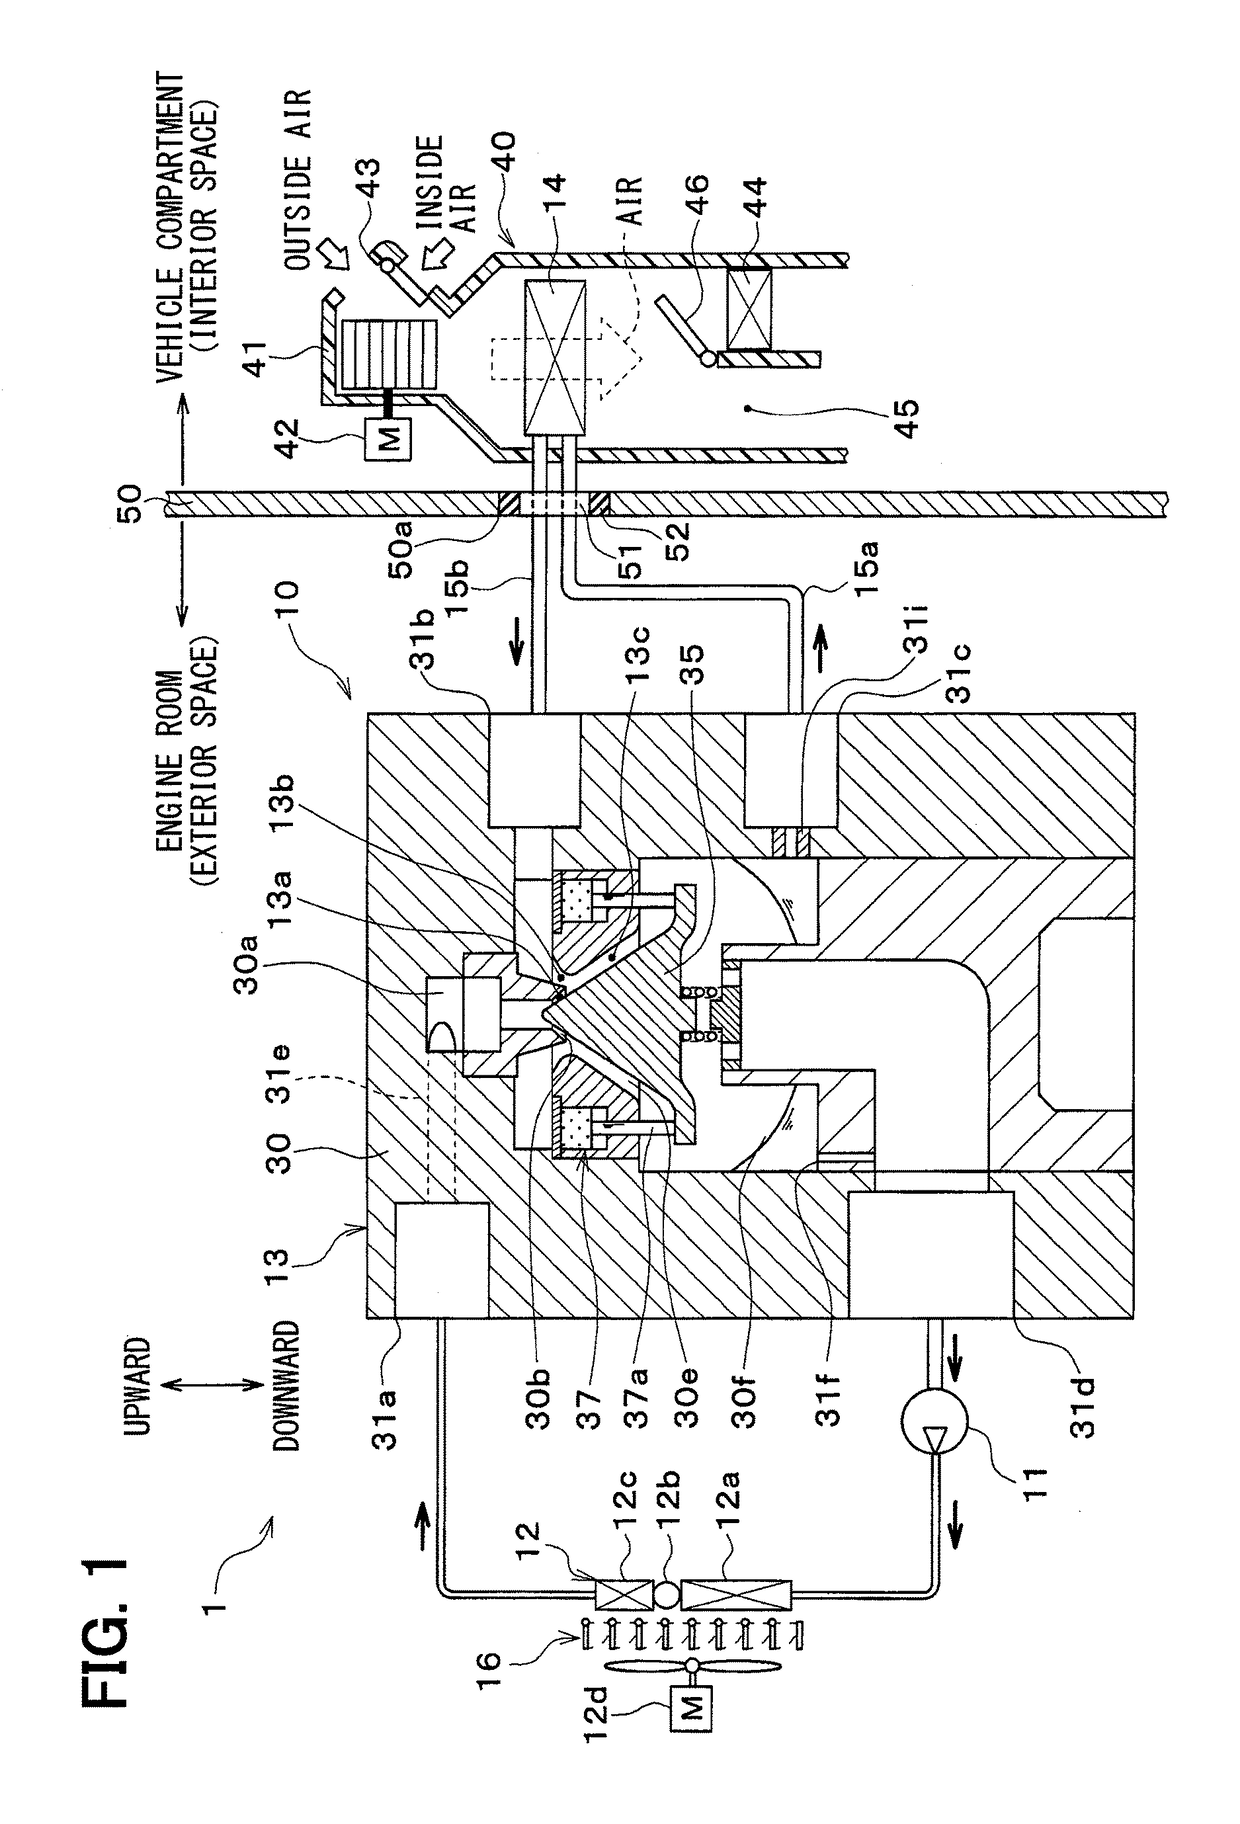 Ejector refrigeration cycle device